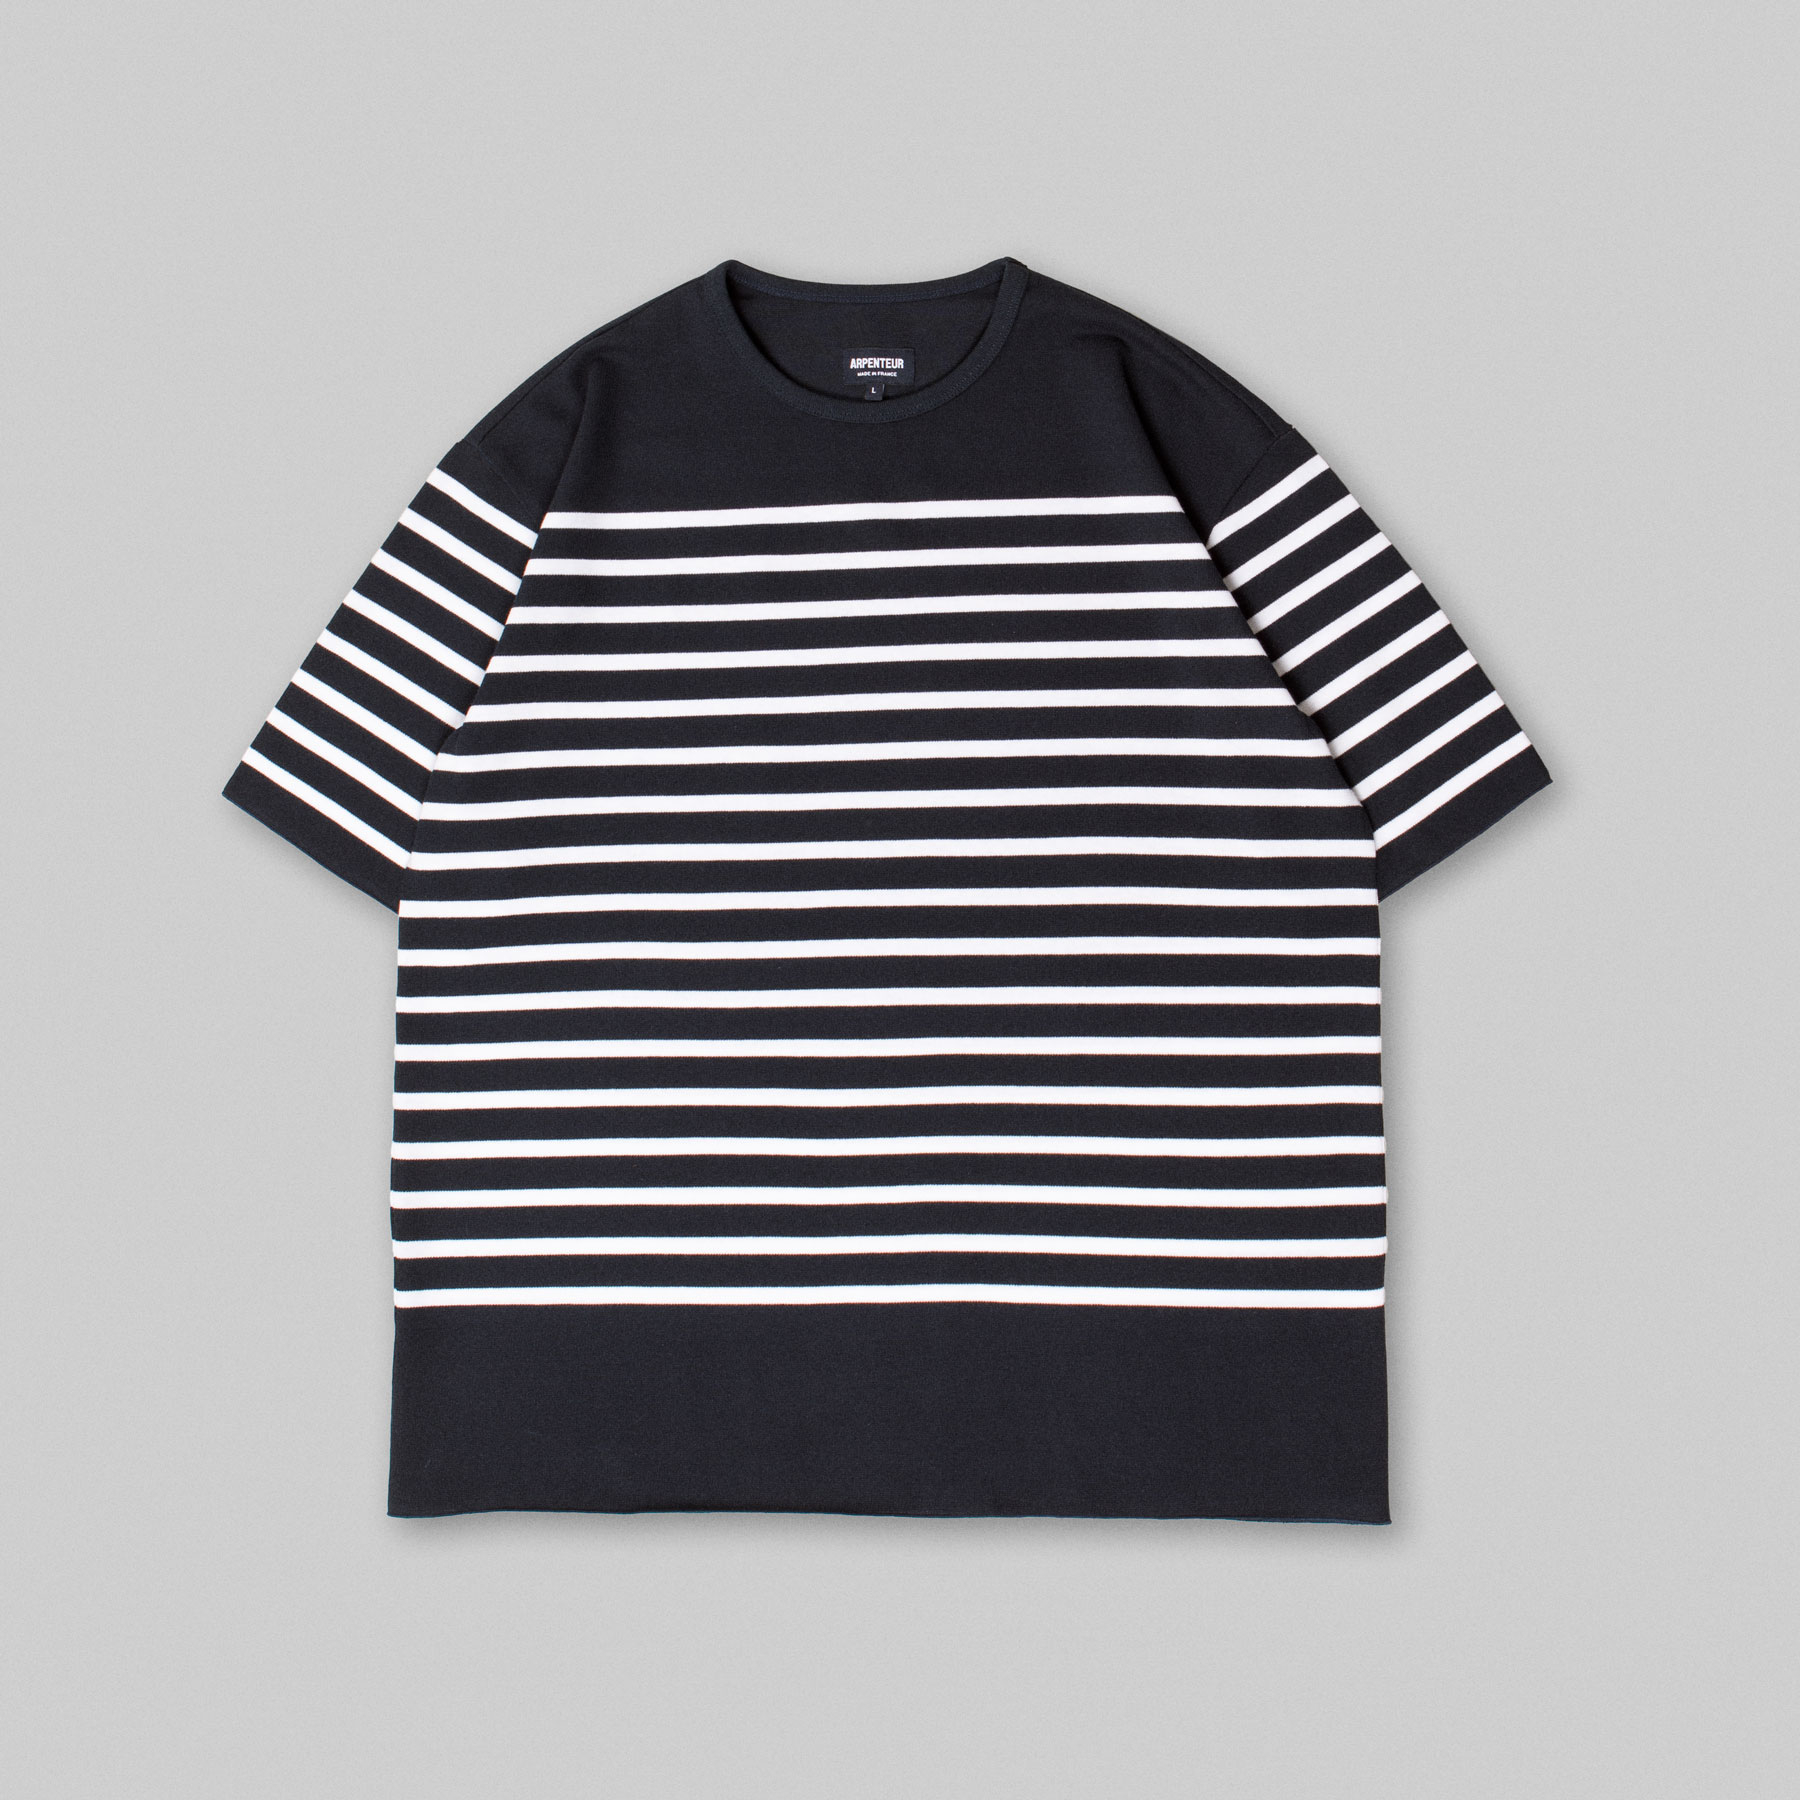 PONTUS t-shirt by Arpenteur in Midnight/White color